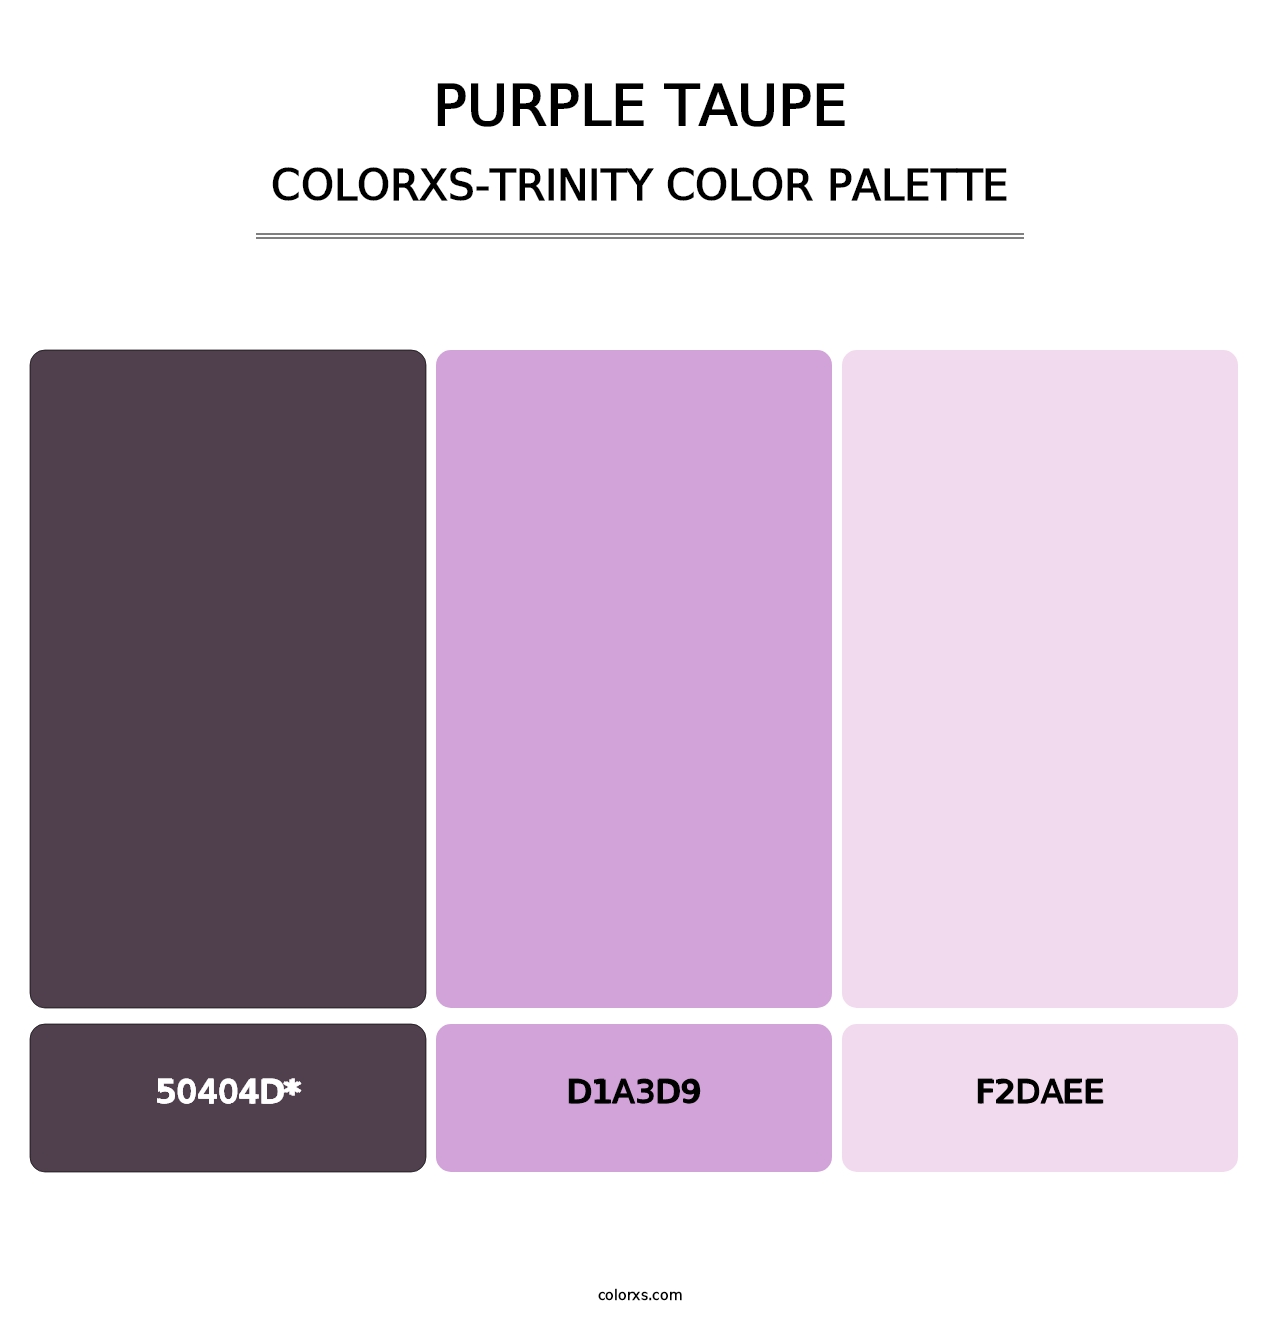 Purple Taupe - Colorxs Trinity Palette